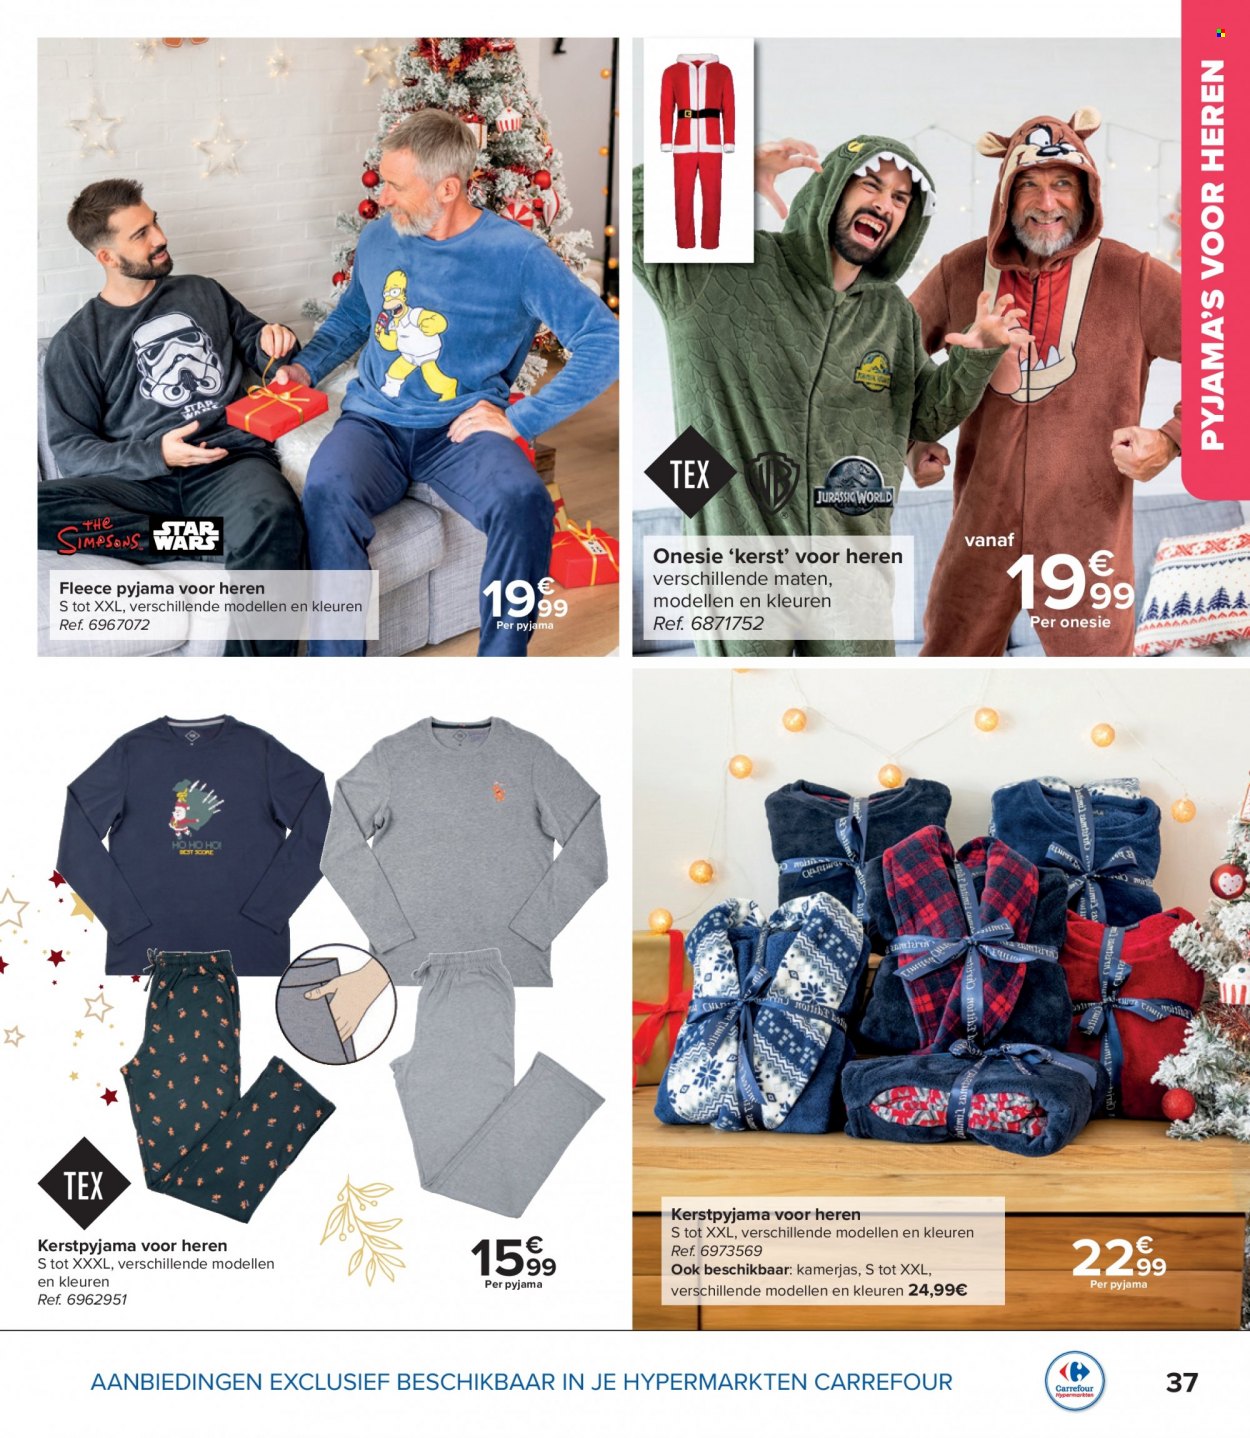 Catalogue Carrefour hypermarkt - 15.11.2023 - 31.12.2023. Page 37.